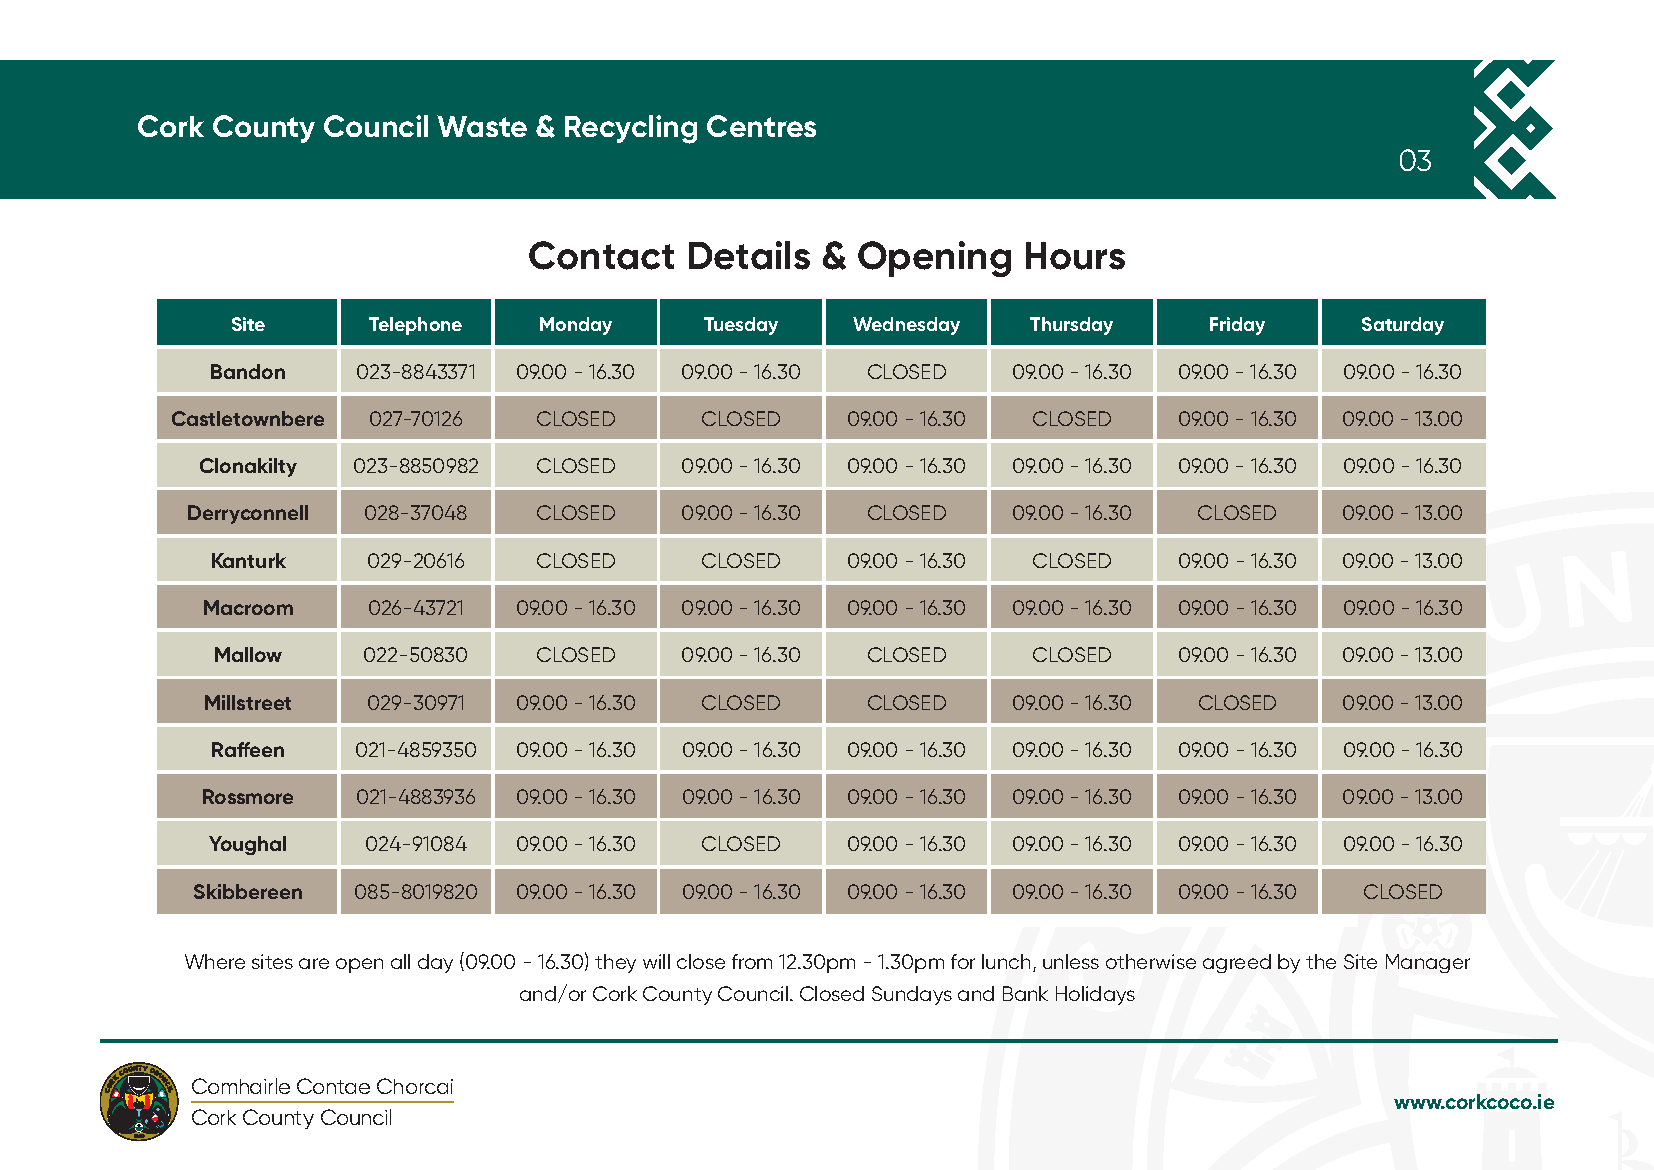 Cork County Council Civic Amenity Site Opening Hours and Contact Details